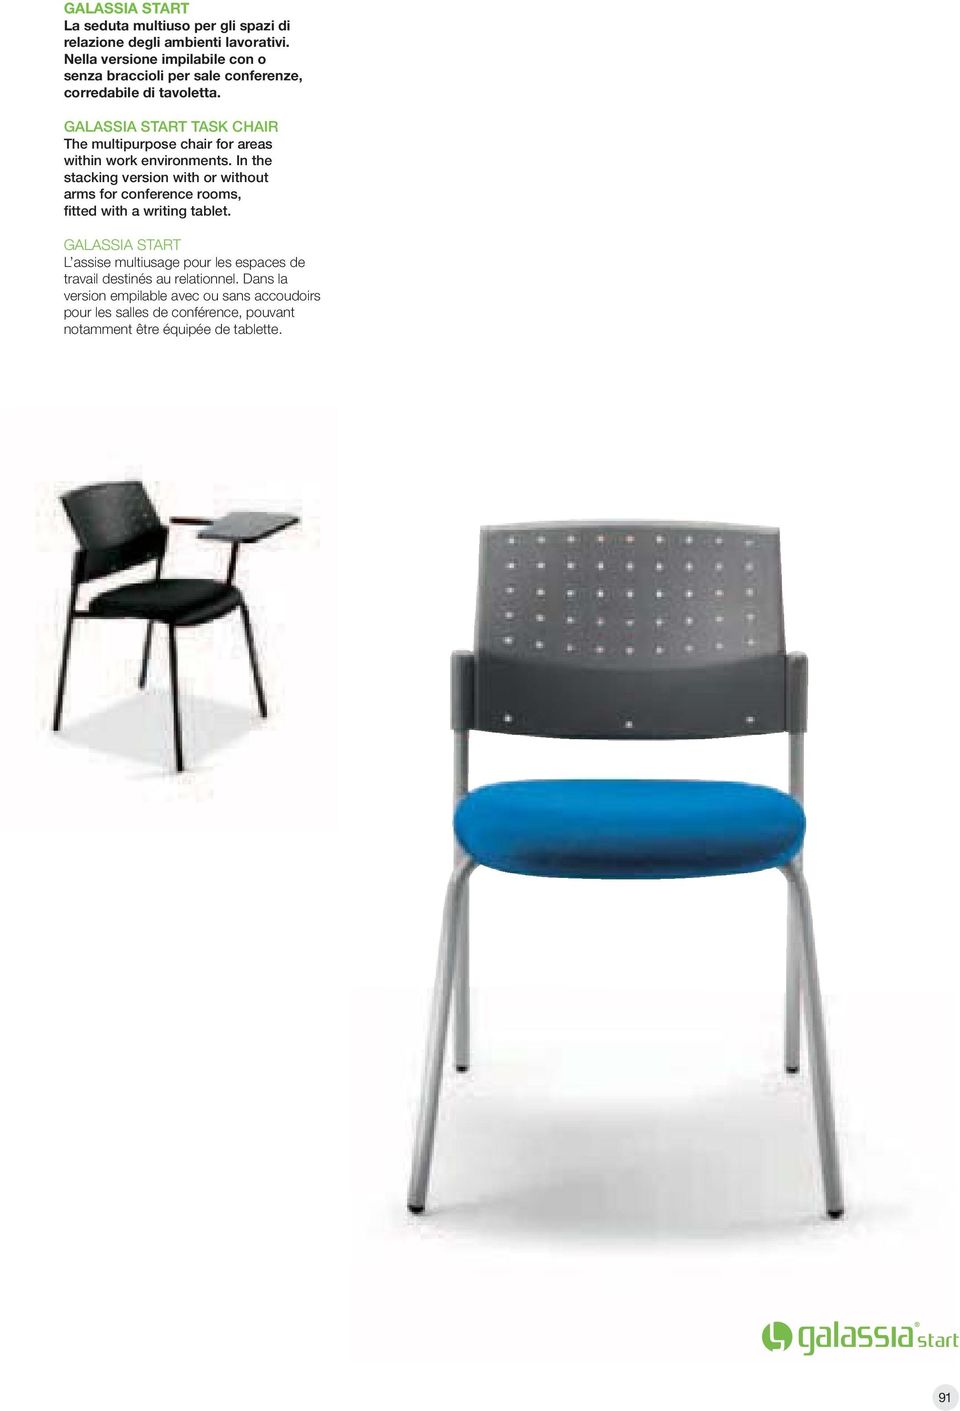 GALASSIA START TASK CHAIR The multipurpose chair for areas within work environments.